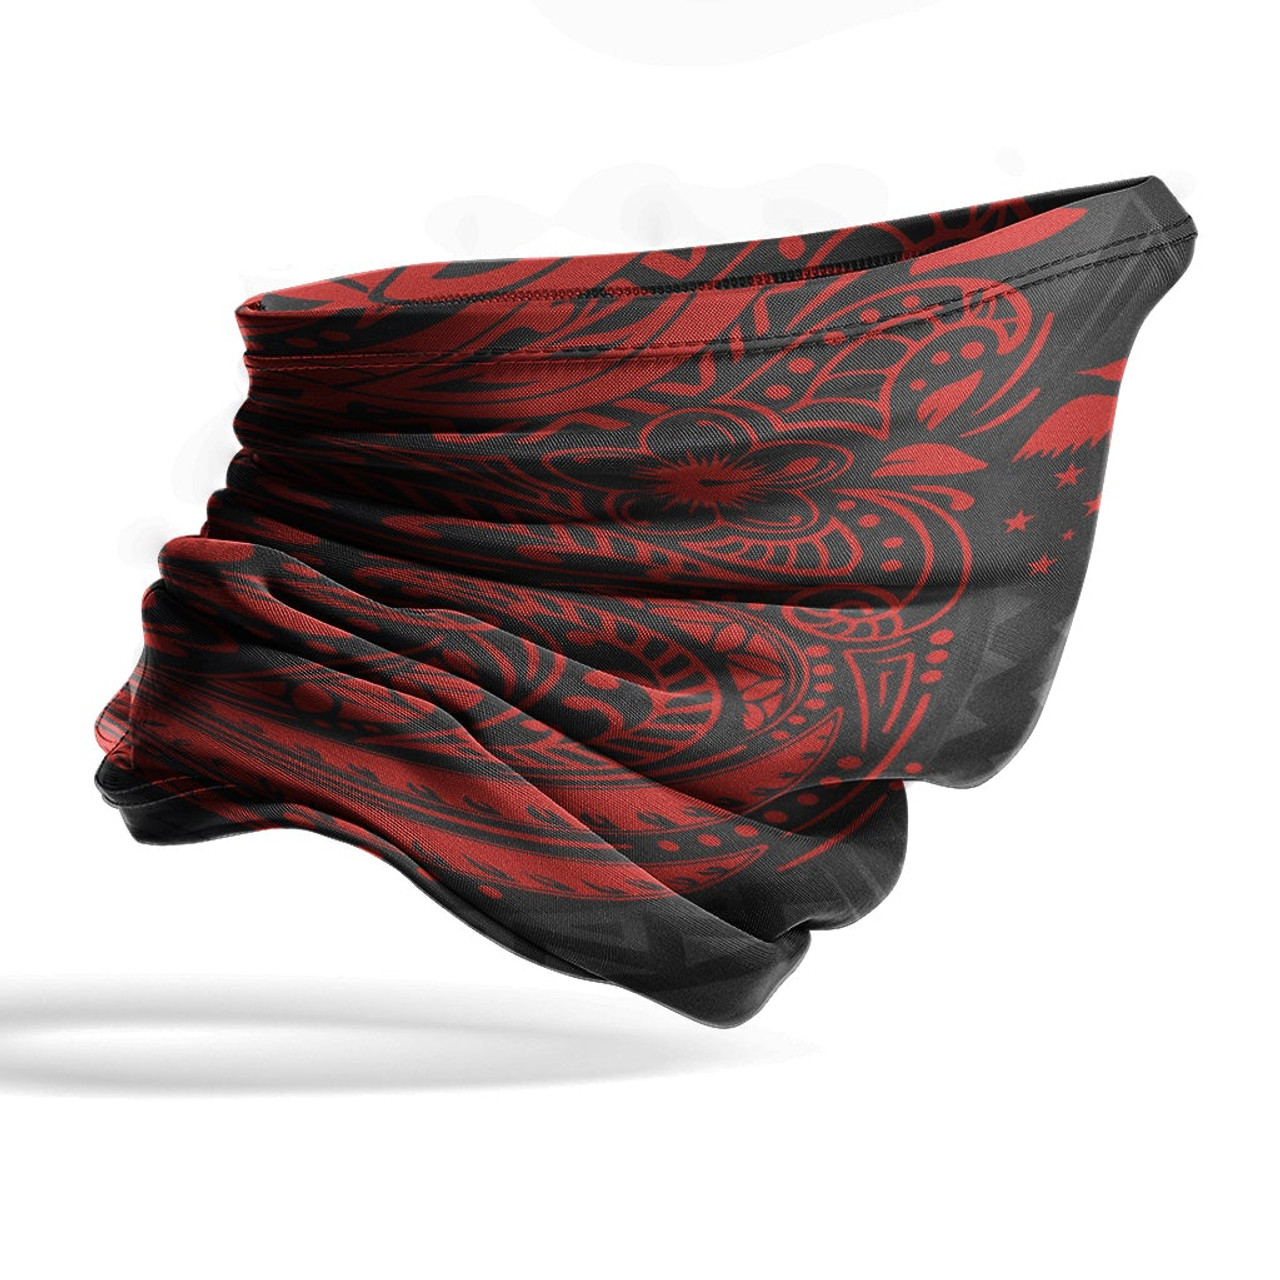 Papua New Guinea Neck Gaiter - Floral Tattoo Red 4